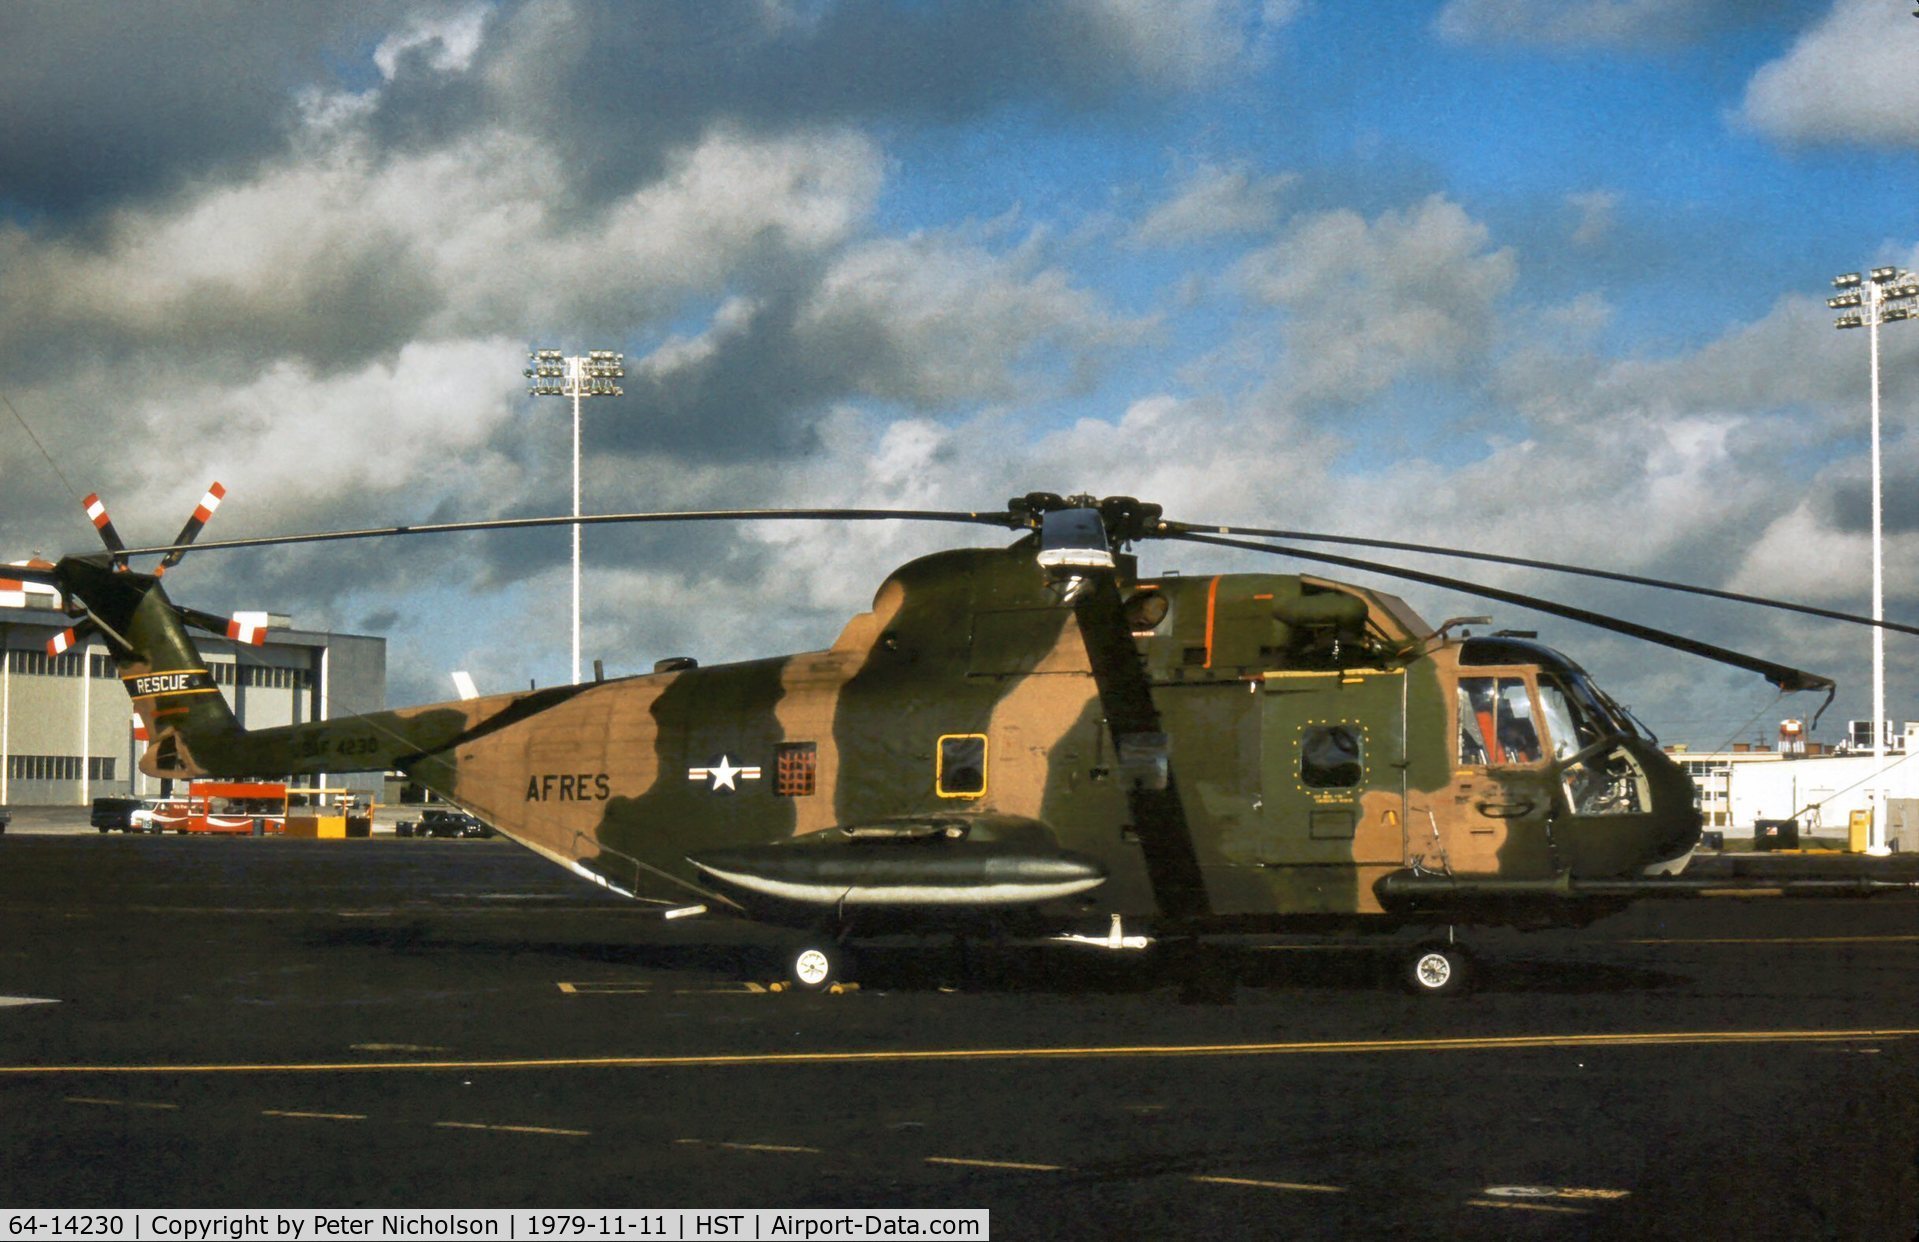 64-14230, 1964 Sikorsky HH-3E Jolly Green Giant C/N 61-533, Another view of the 38 ARRS HH-3E on display at the 1979 Homestead AFB Open House.